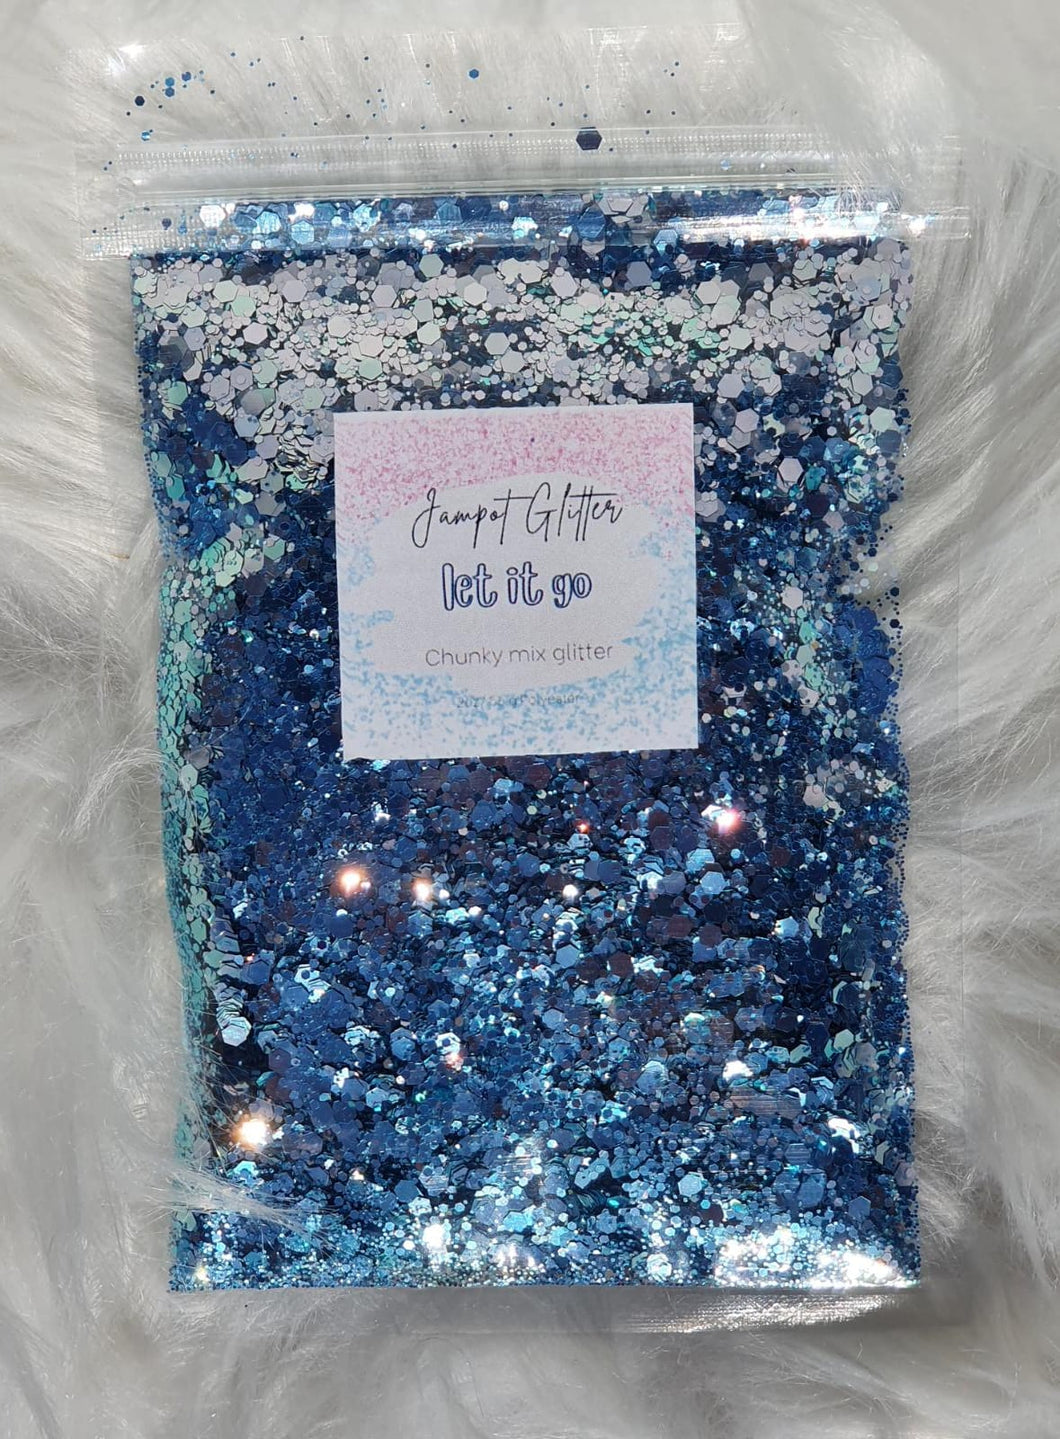 Let it go Chunky Mix Glitter